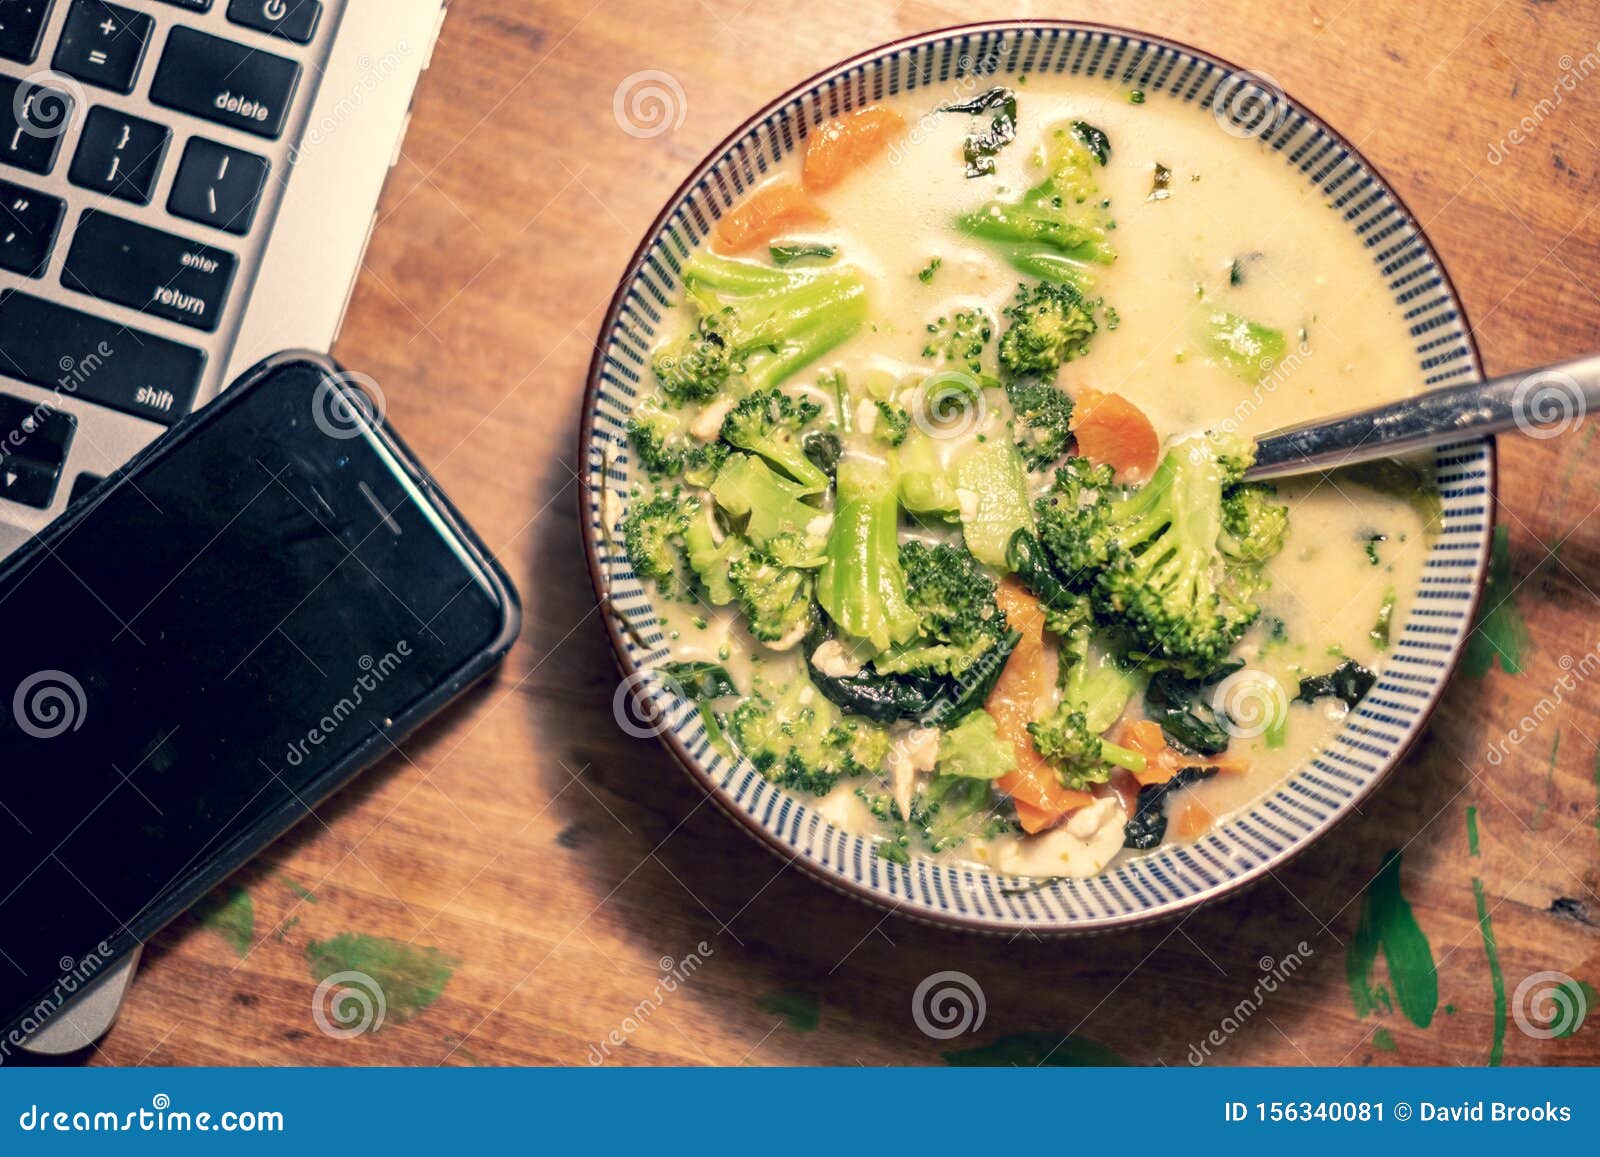 bowl of thai curry soup next to laptop and phone